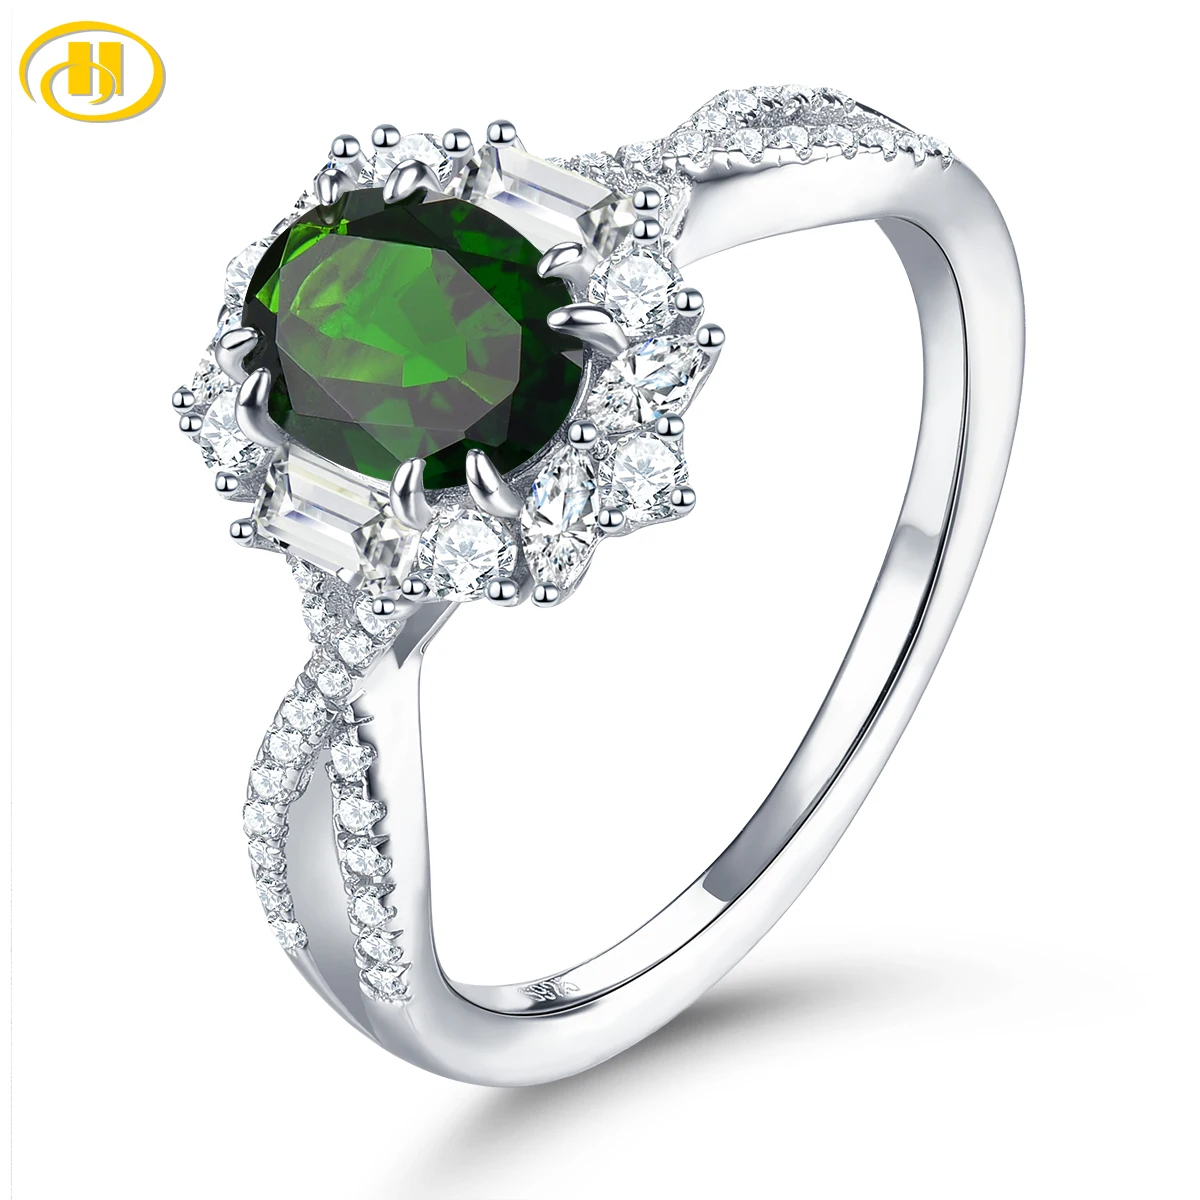 

Natural Chrome Diopside 925 Sterling Silver Pendant 1 Carat Genuine Gemstone Romantic Style Fine Jewelry for Valentine Day Gift